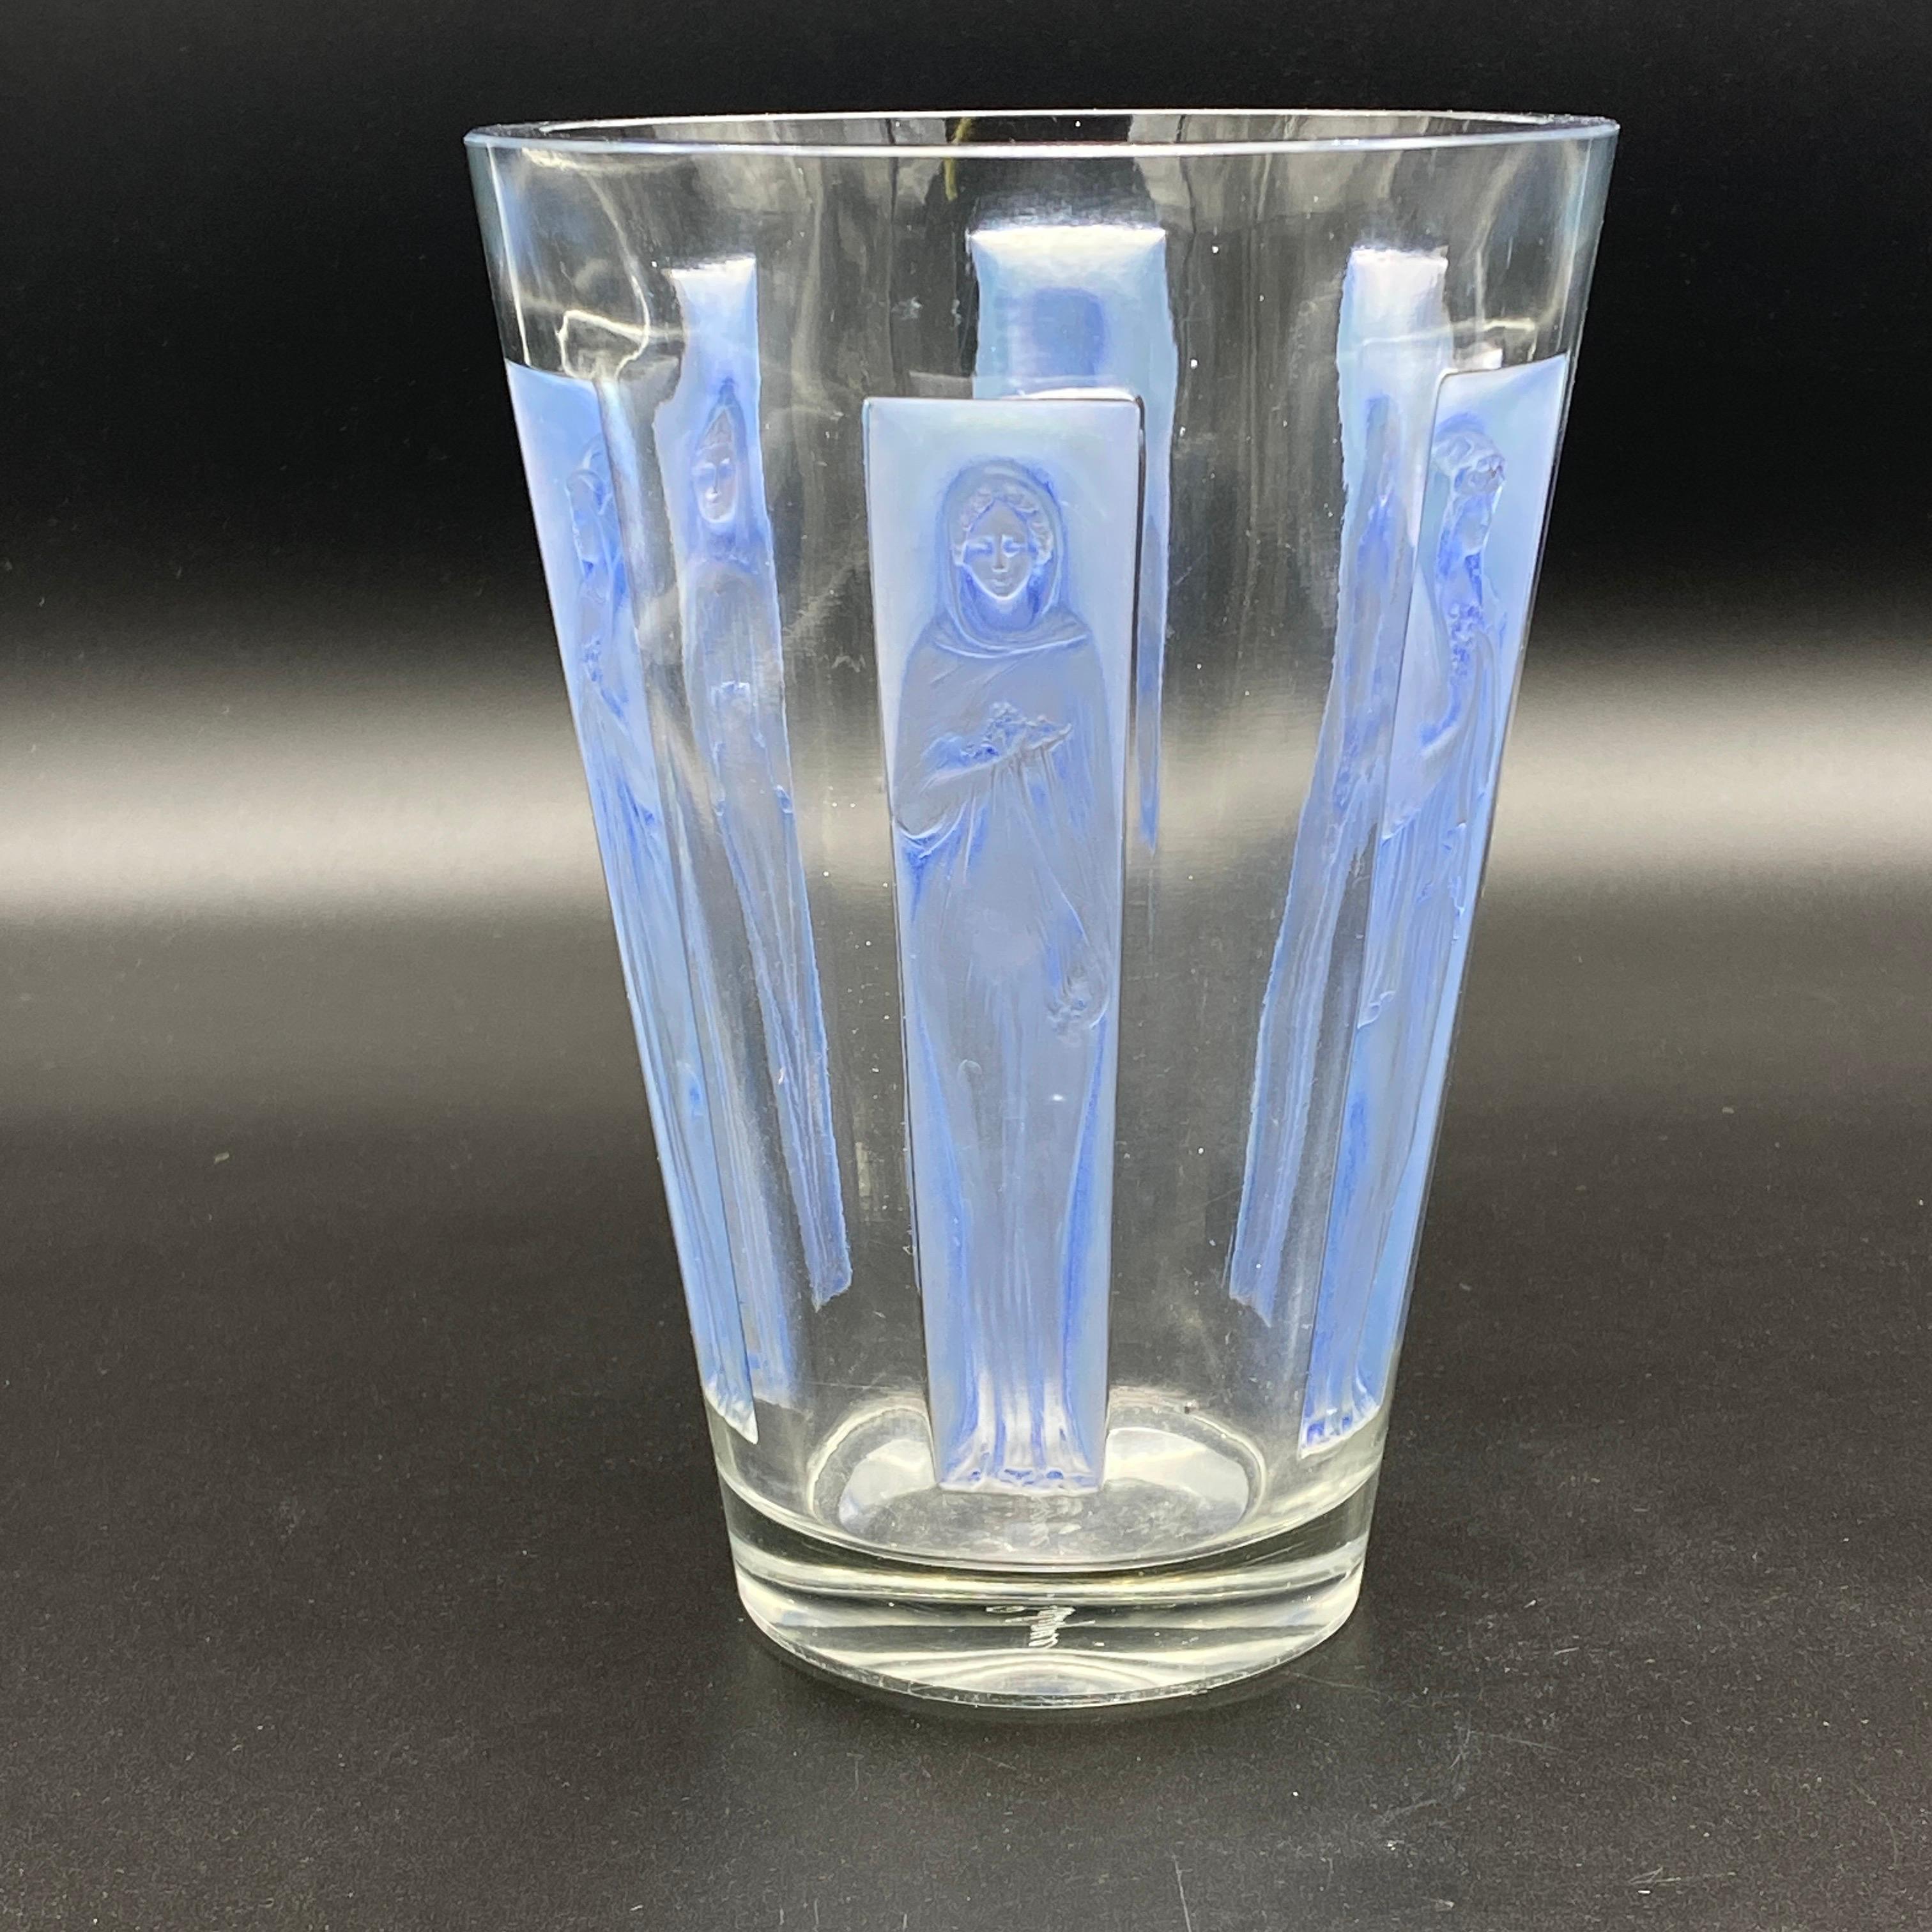 The Gobelet 6 Figurines vase was made by R.Lalique in 1920 in white glass.

This piece is an early example as the mold is very sharp as the molded signature on the side of a Figurines shows.

The glass is in excellent condition with a blue patina on